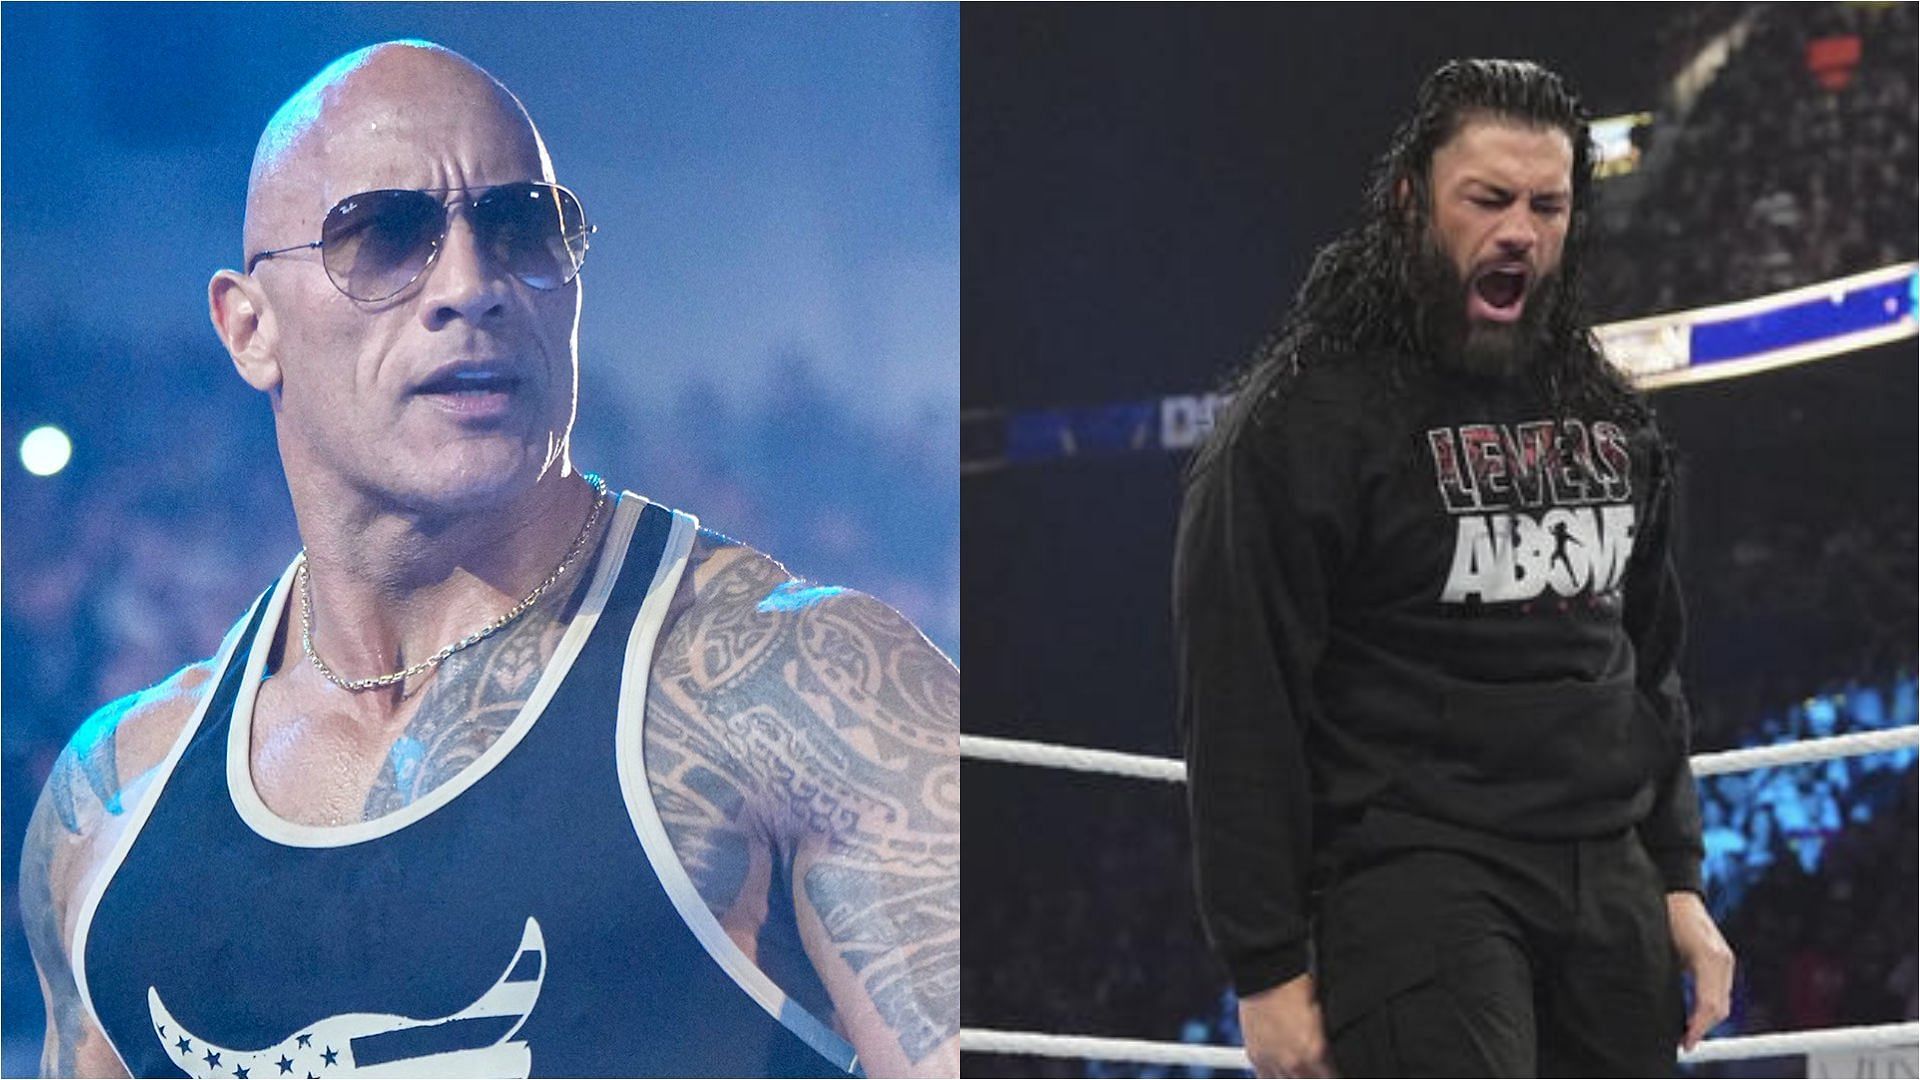 The Rock could challenge Roman Reigns to a match